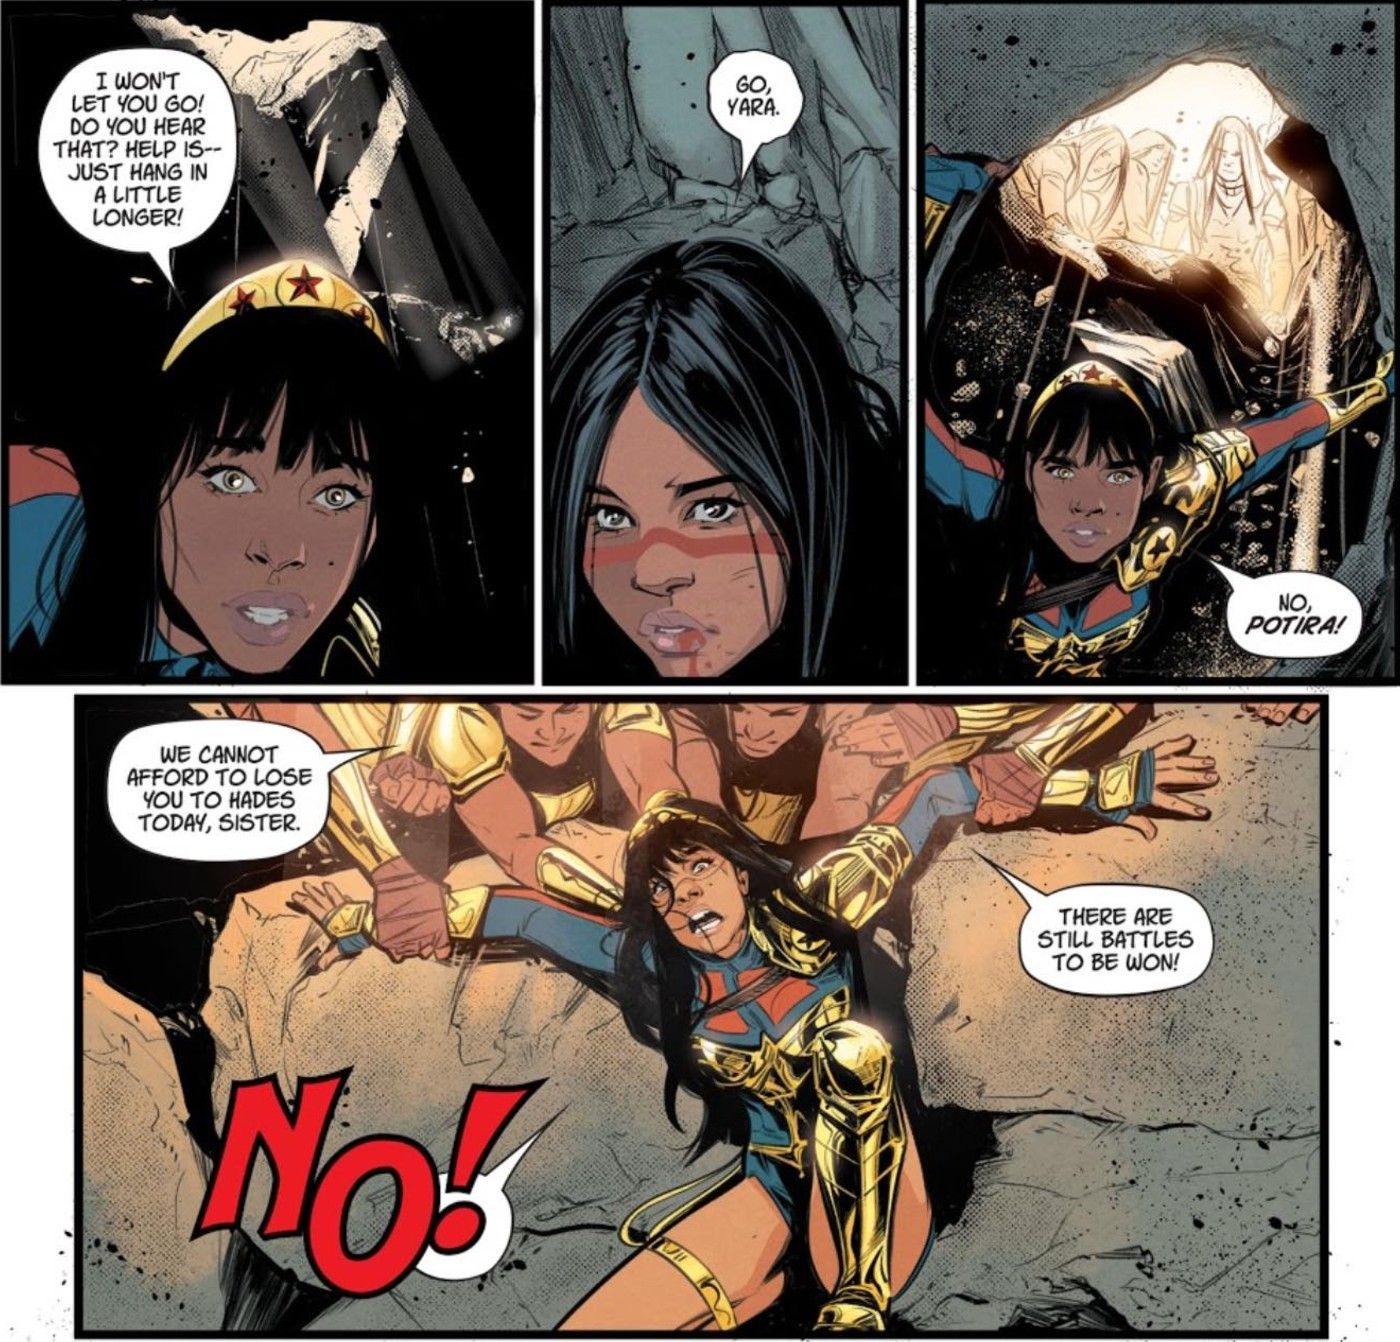 The New Wonder Woman Just Failed Her First Mission